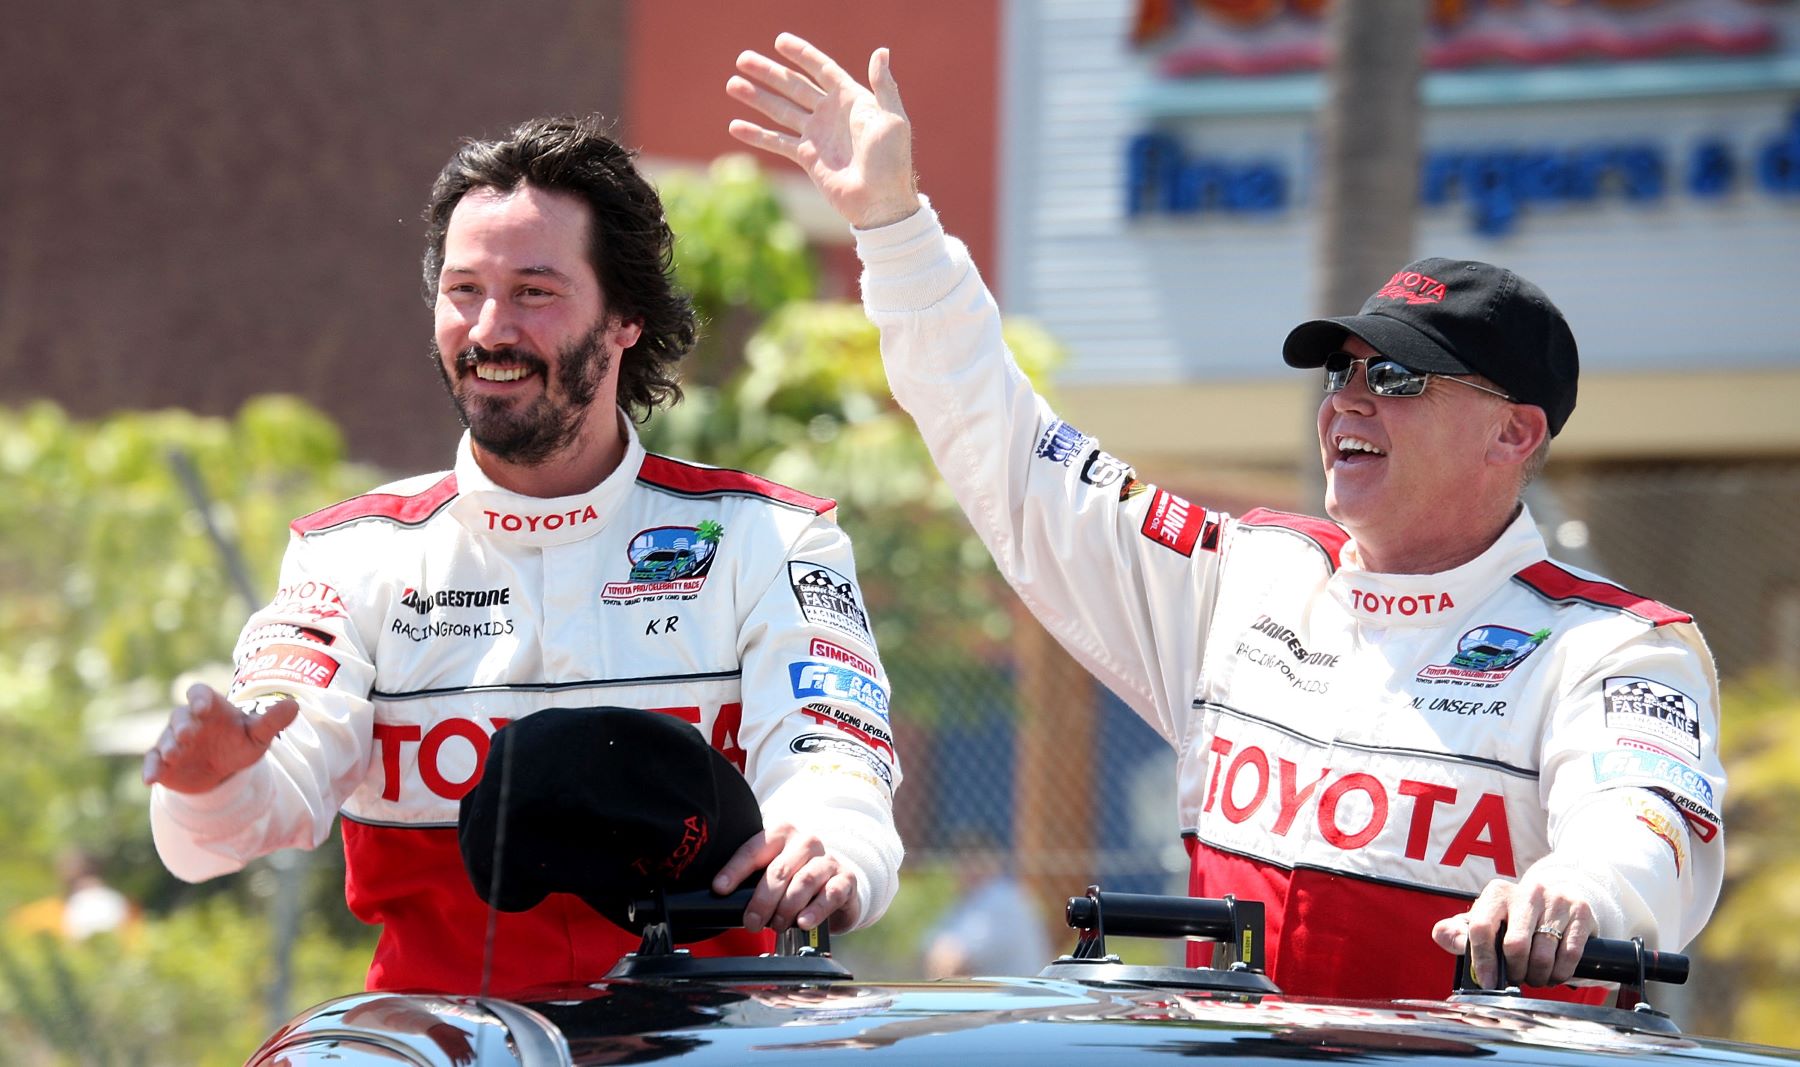 Keanu Reeves and racer Al Unser Jr. after winning a celebrity race at the Toyota Grand Prix